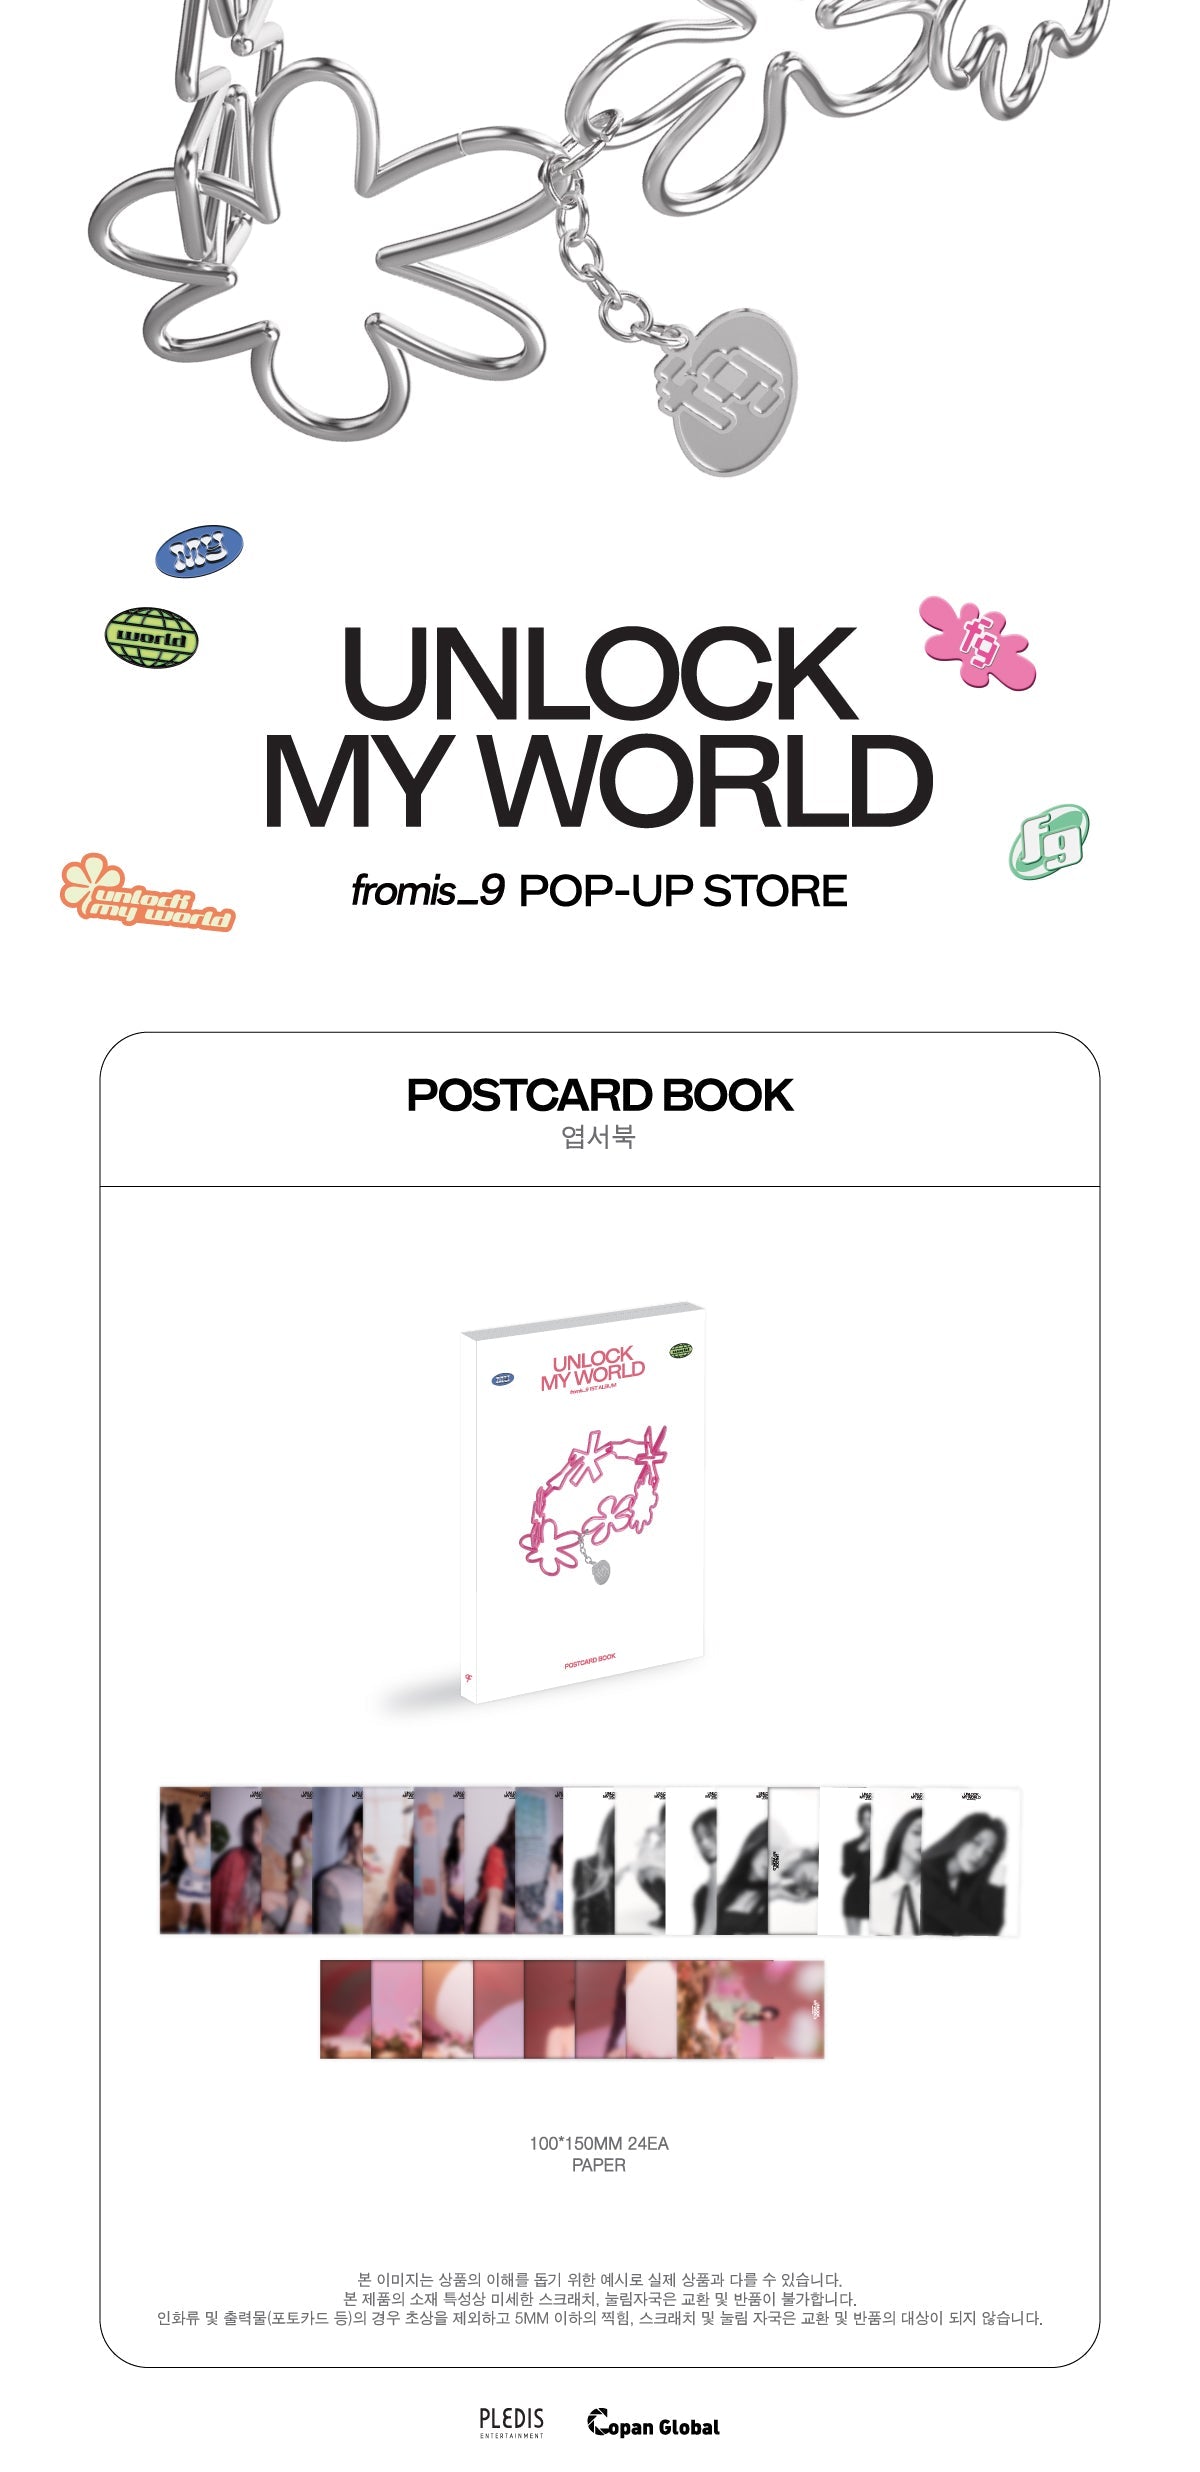 FROMIS_9 POP UP STORE OFFICIAL MD - UNLOCK MY WORLD